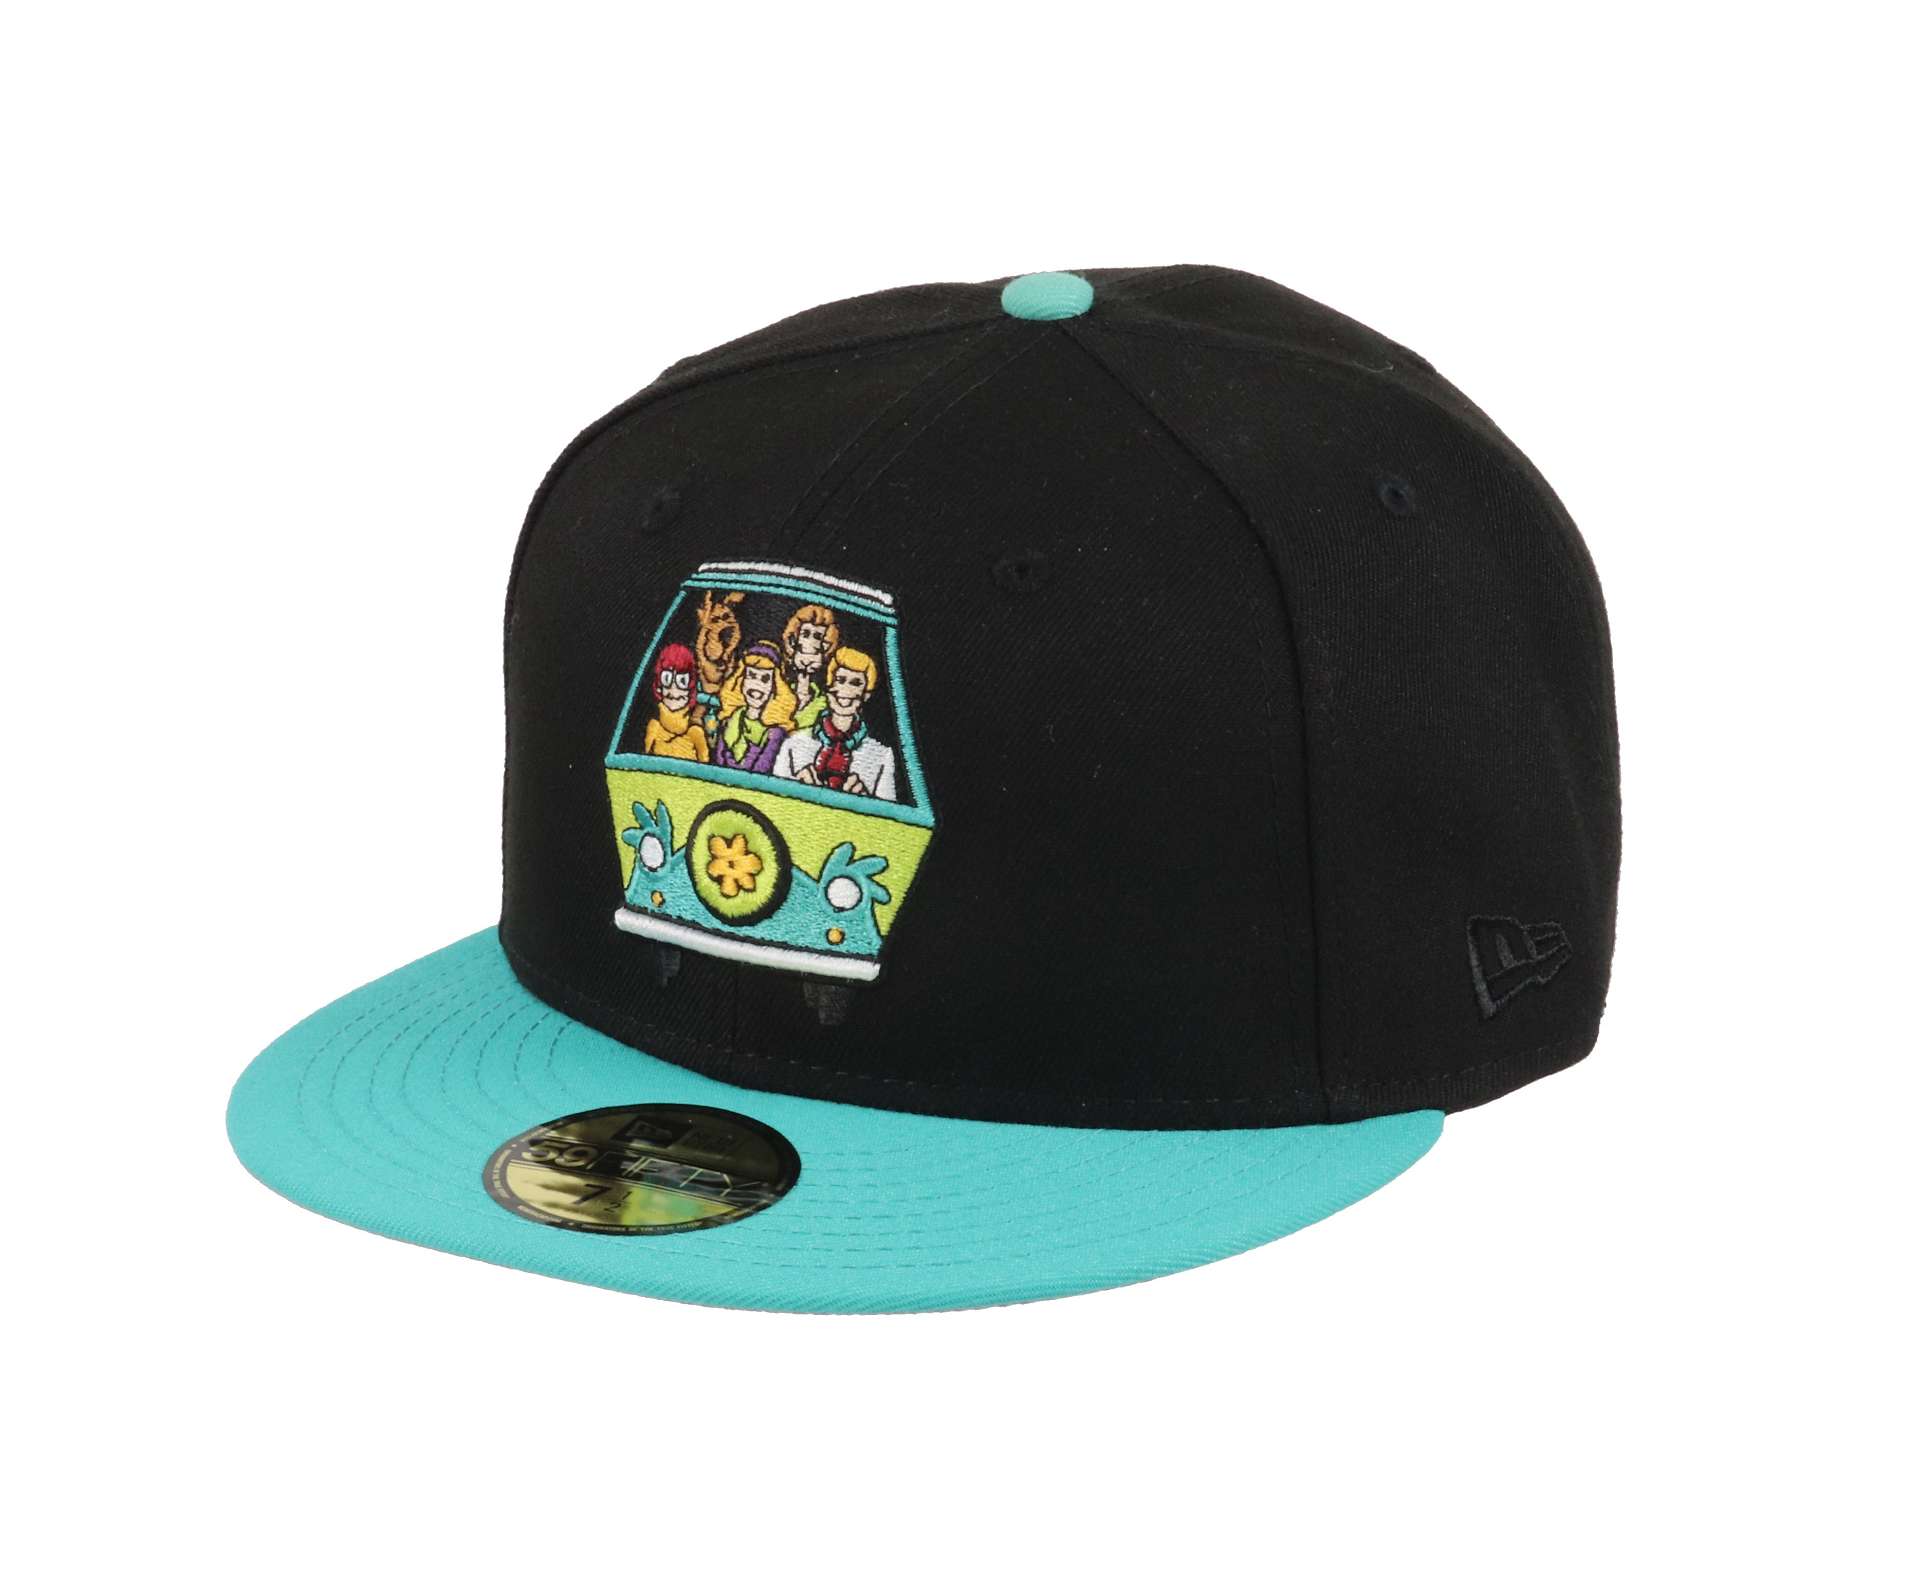 Scooby-Doo Myteri Inc. Black 59Fifty Fitted Basecap New Era